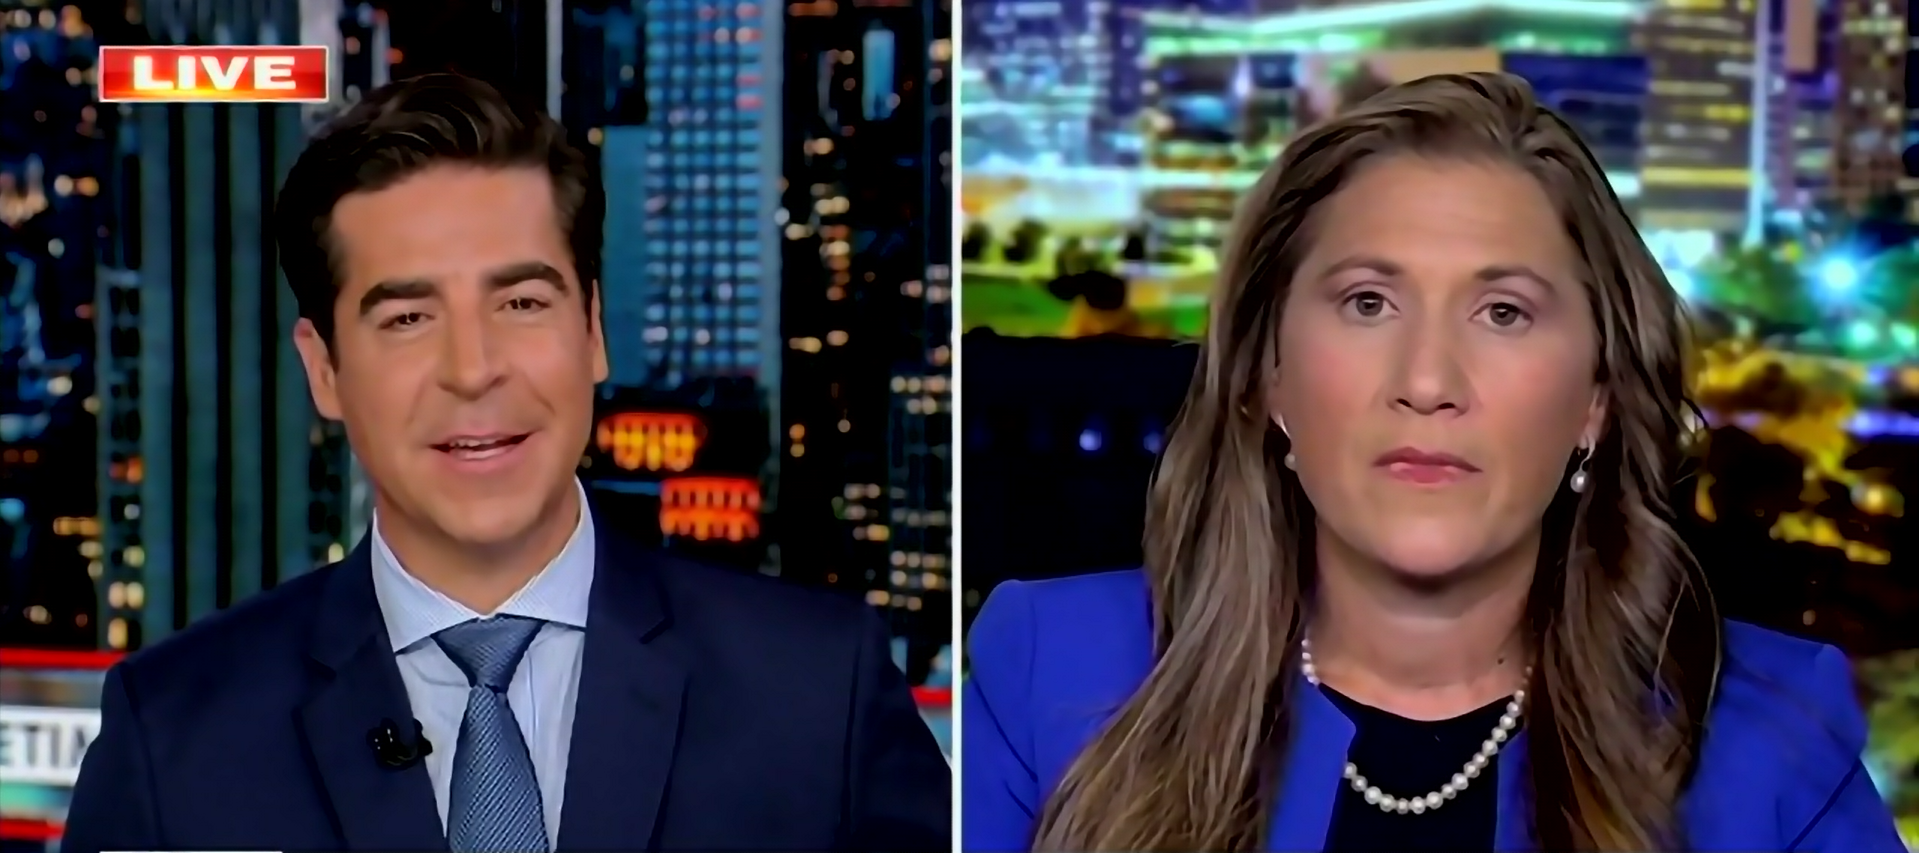 ‘Unhinged People’: Jesse Watters Blasts Journalist Who Called Child Services Over ‘Happy Columbus Day’ Tweet